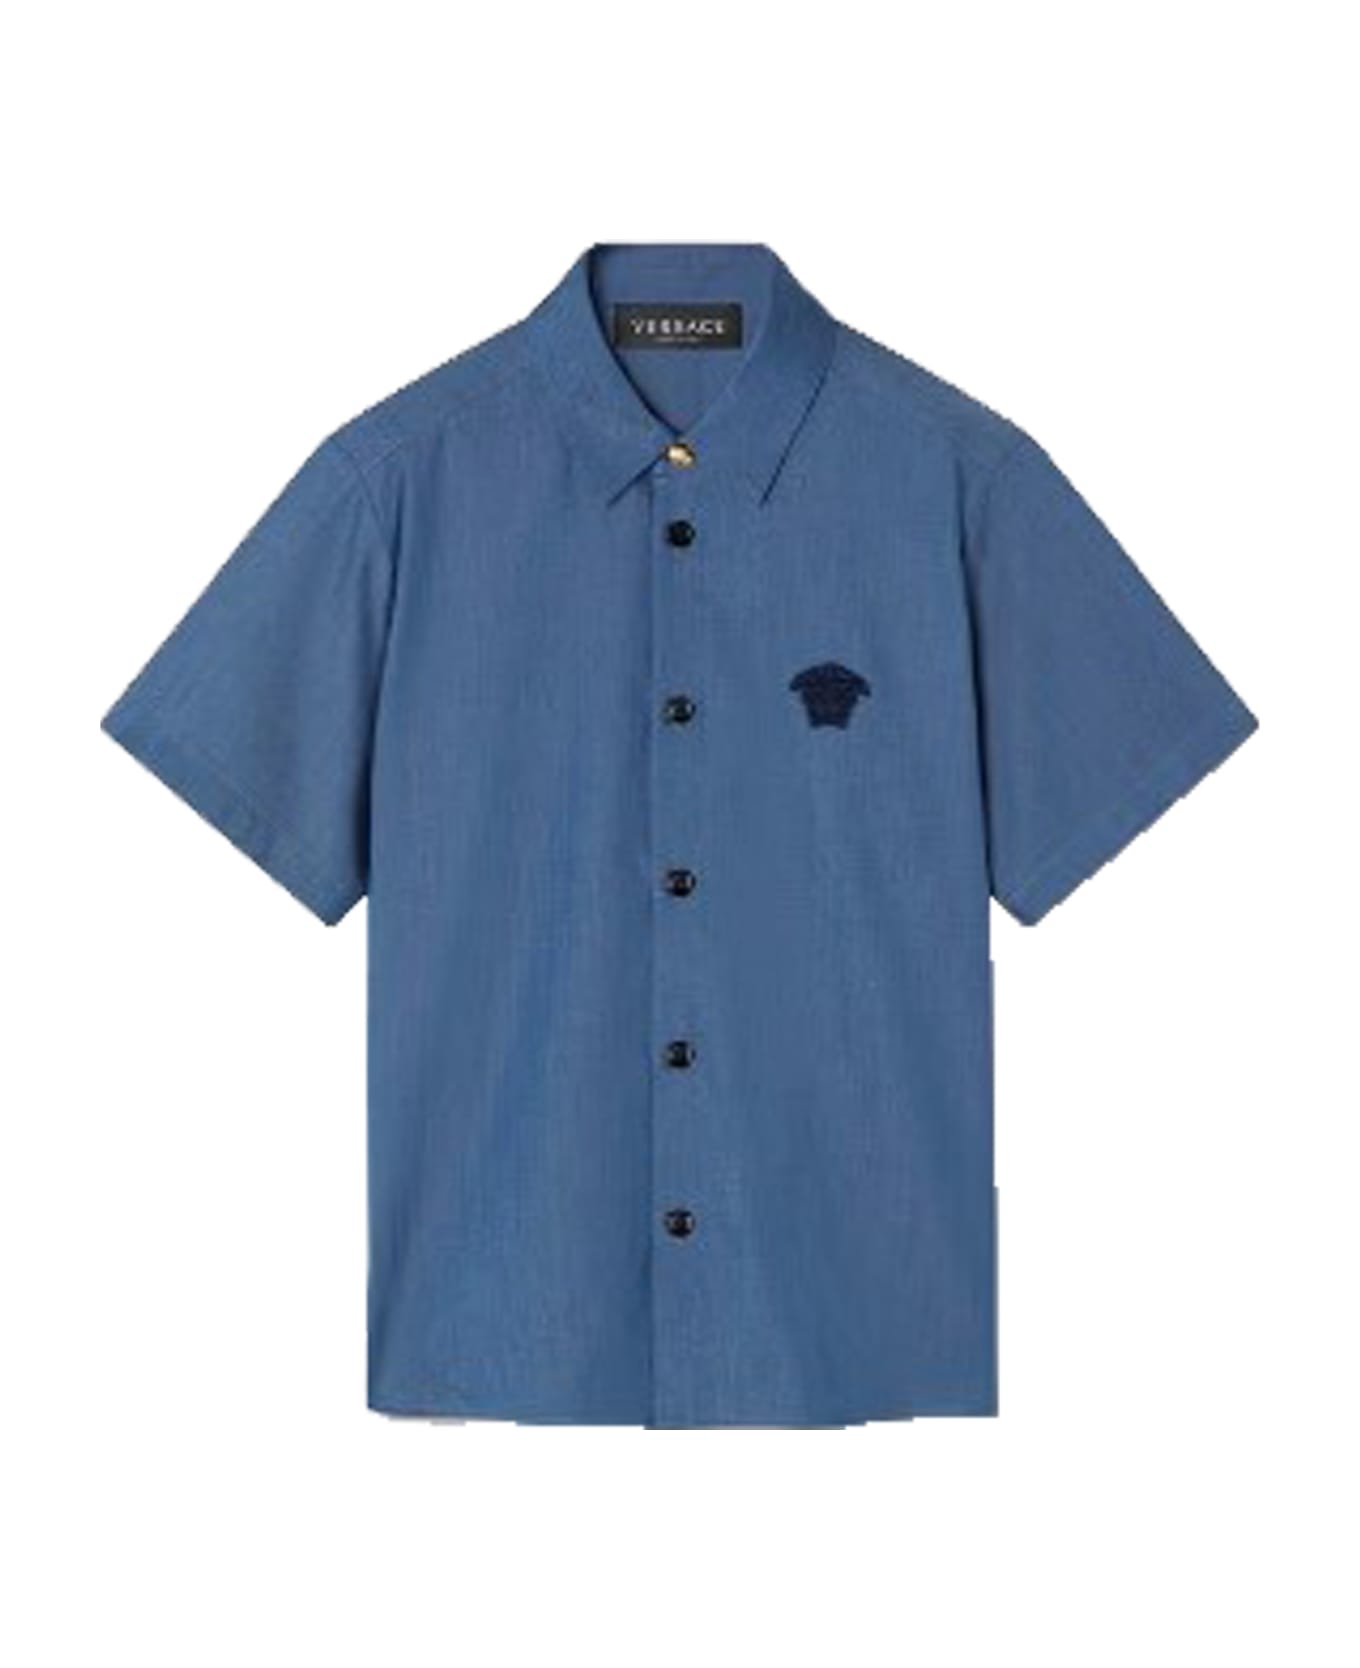 Versace Shirt With Medusa Embroidery - Blue